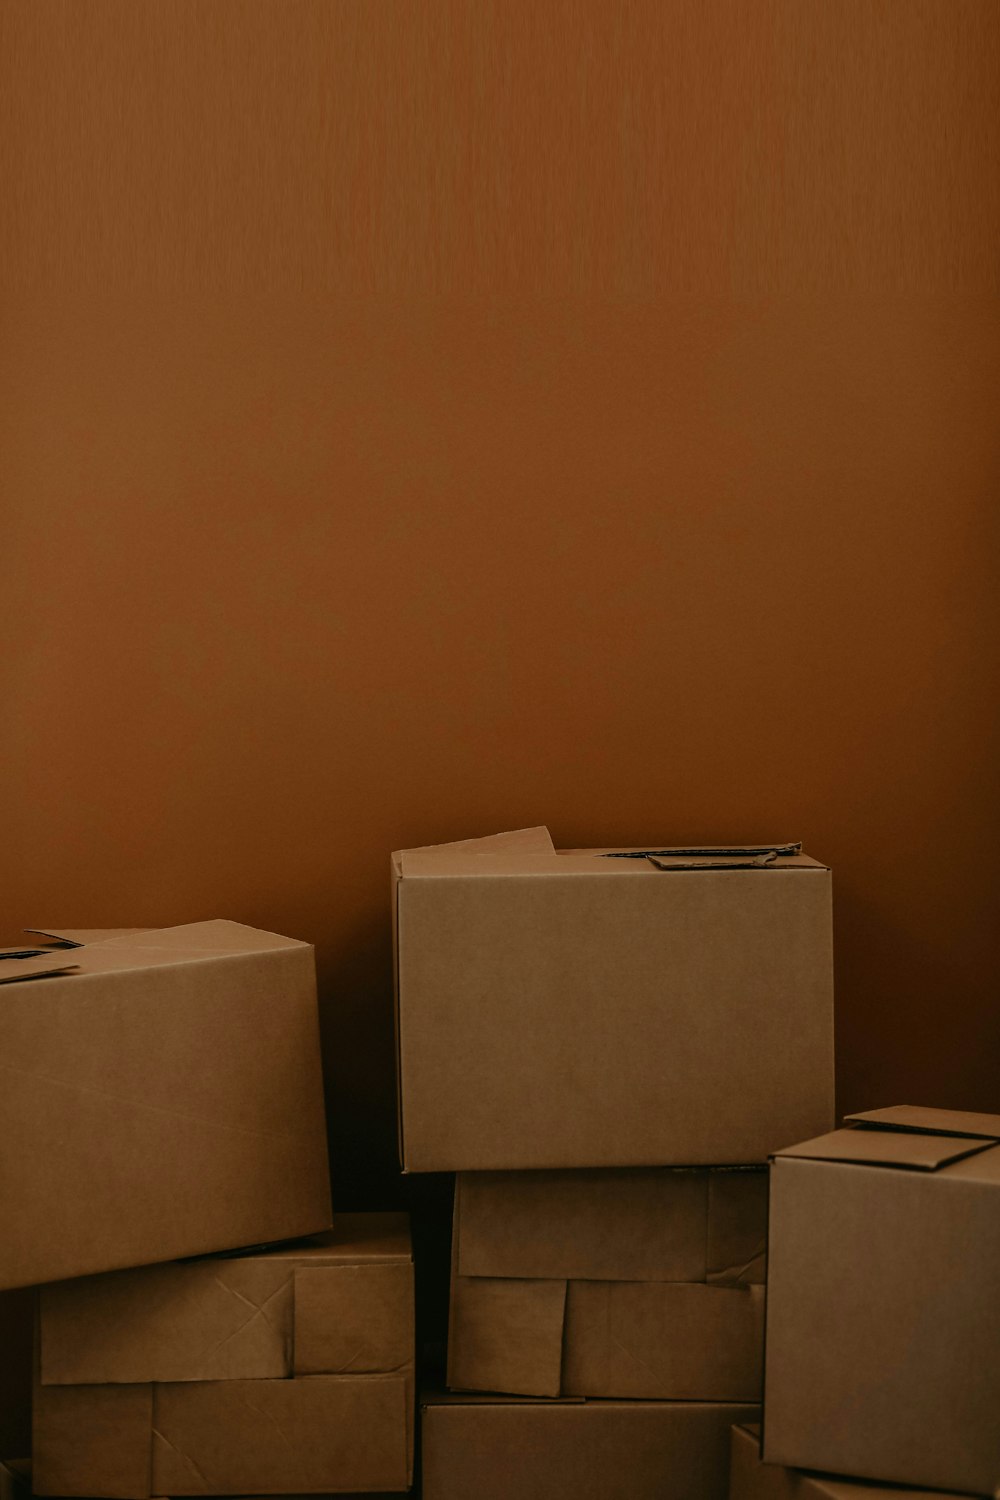 450+ Boxes Pictures [HQ] | Download Free Images on Unsplash